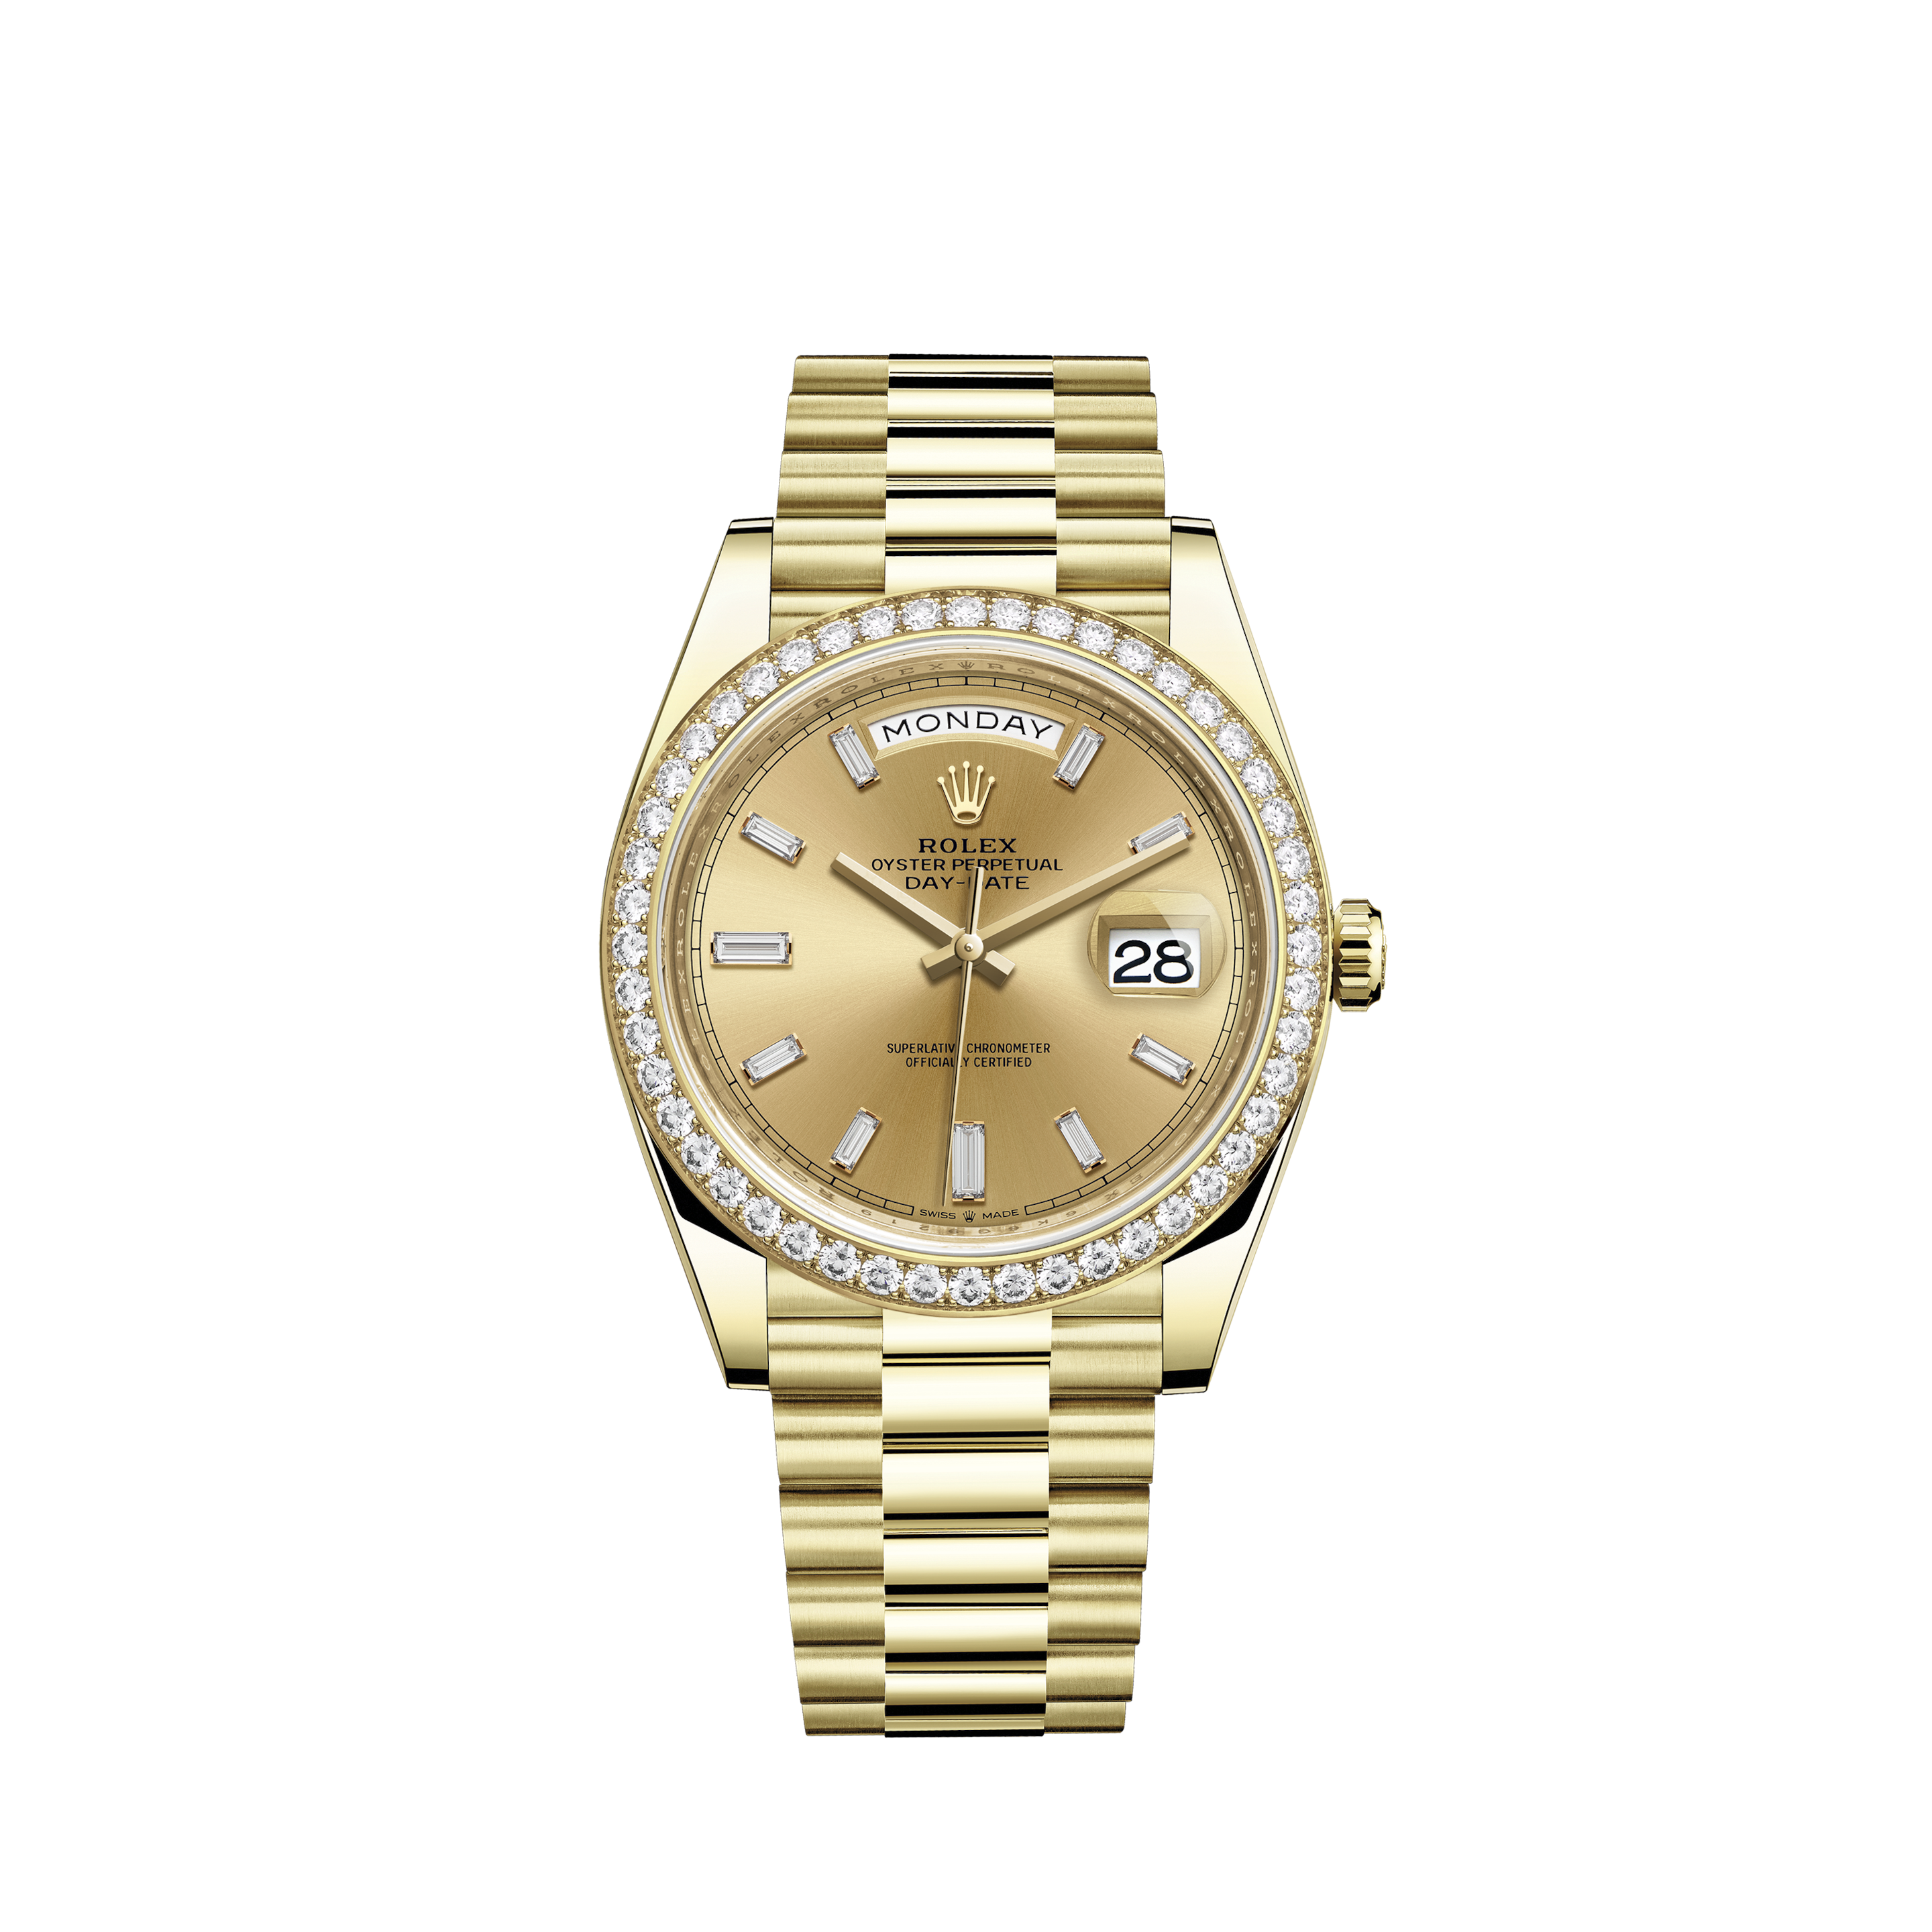 reloj rolex oyster perpetual datejust superlative chronometer officially certified